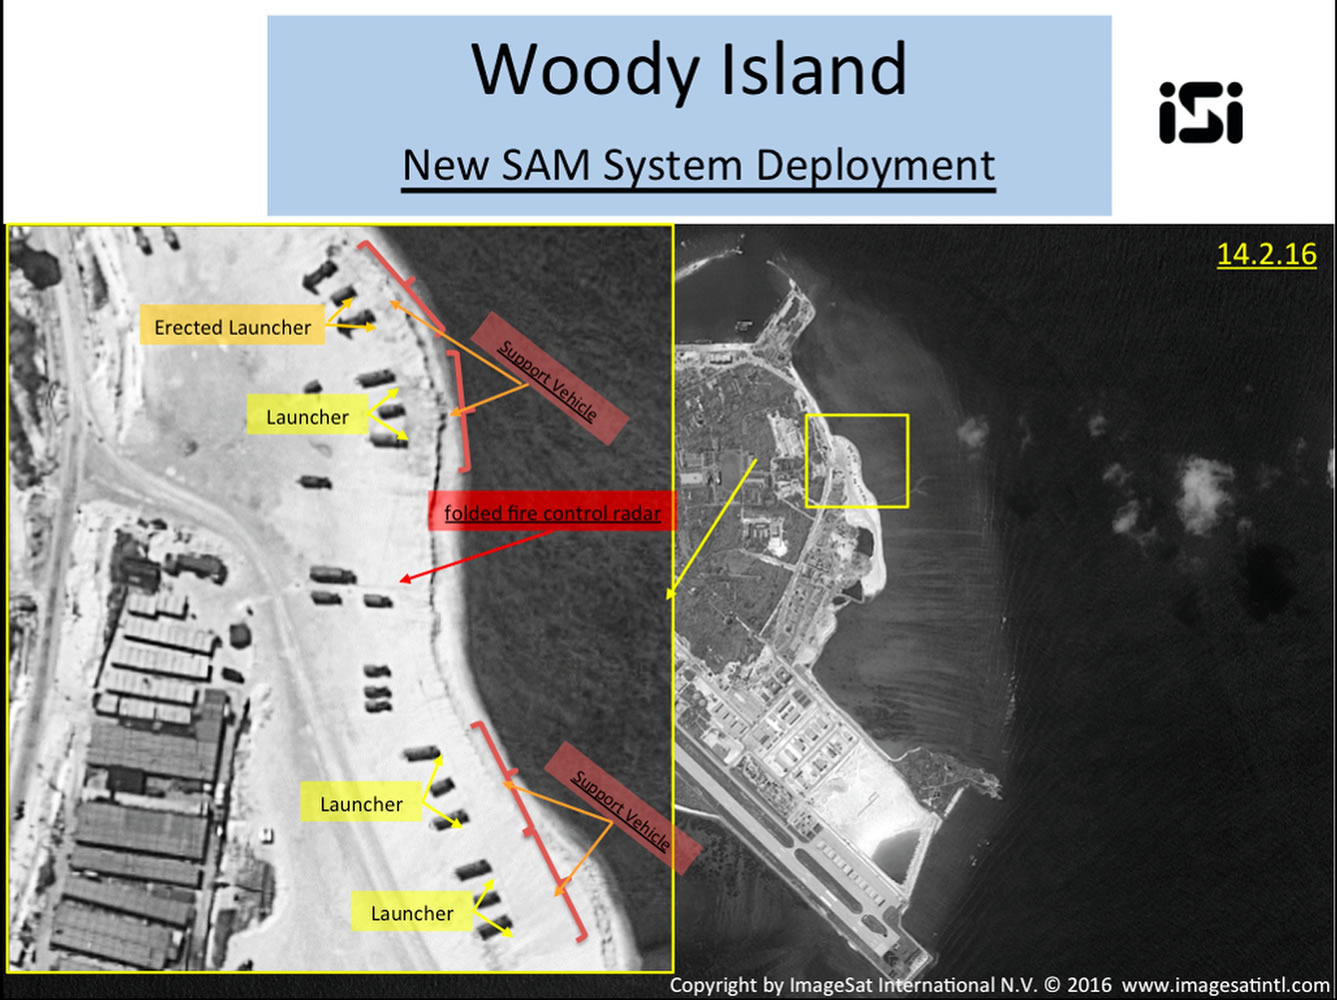 This image with notations provided by ImageSat International N.V., Wednesday, Feb. 17, 2016, shows satellite images of Woody Island, the largest of the Paracel Islands in the South China Sea. A U.S. official confirmed that China has placed a surface-to-air missile system on Woody Island in the Paracel chain, but it is unclear whether this is a short-term deployment or something intended to be more long-lasting. (ImageSat International N.V.